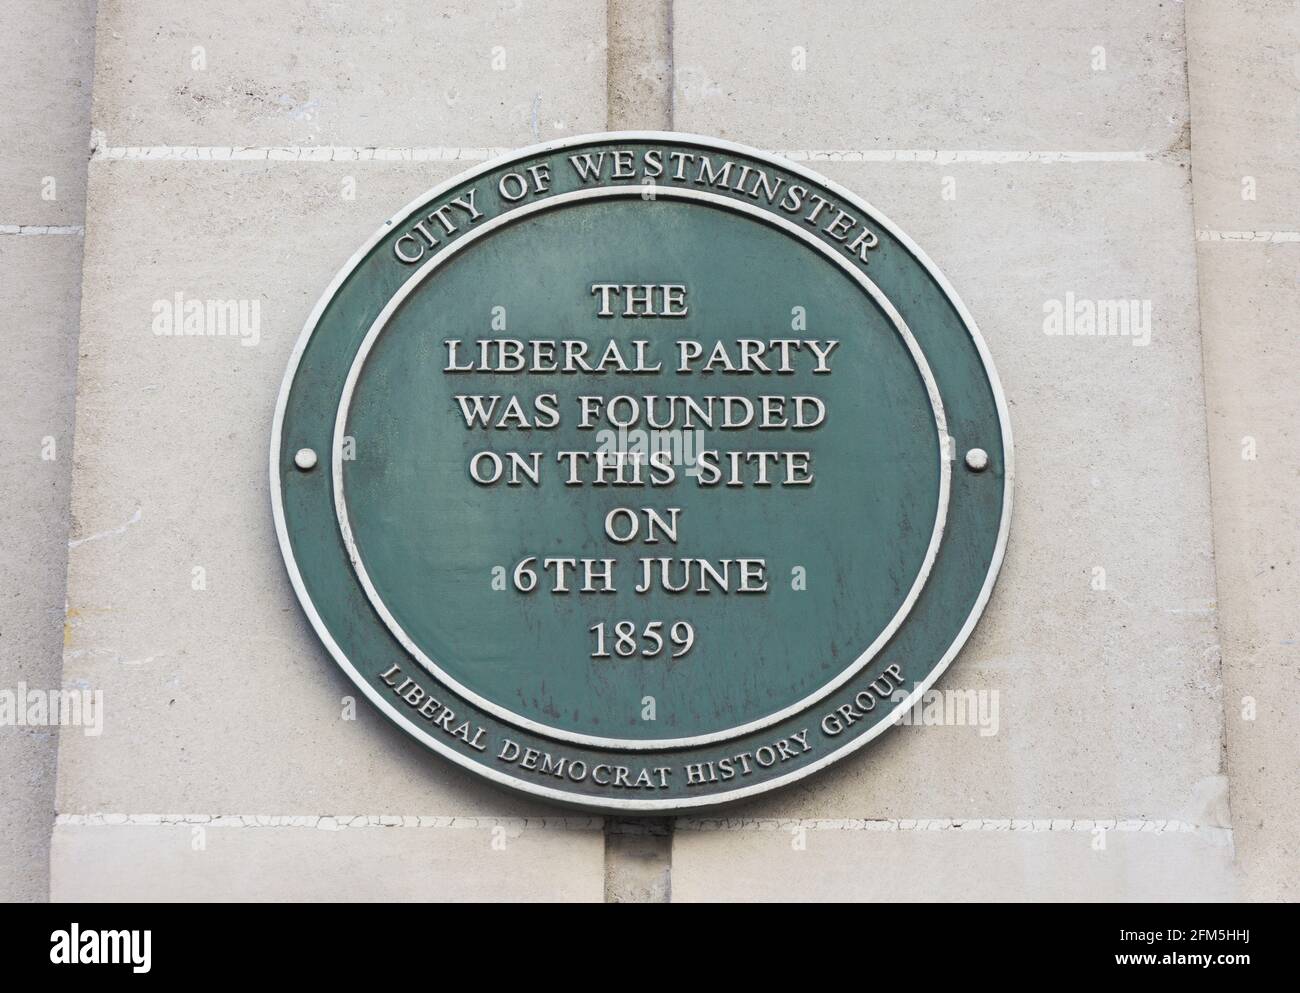 Green Liberal Party formation plaque on wall, King Street, St James's, City of Westminster, Greater London, England, United Kingdom Stock Photo